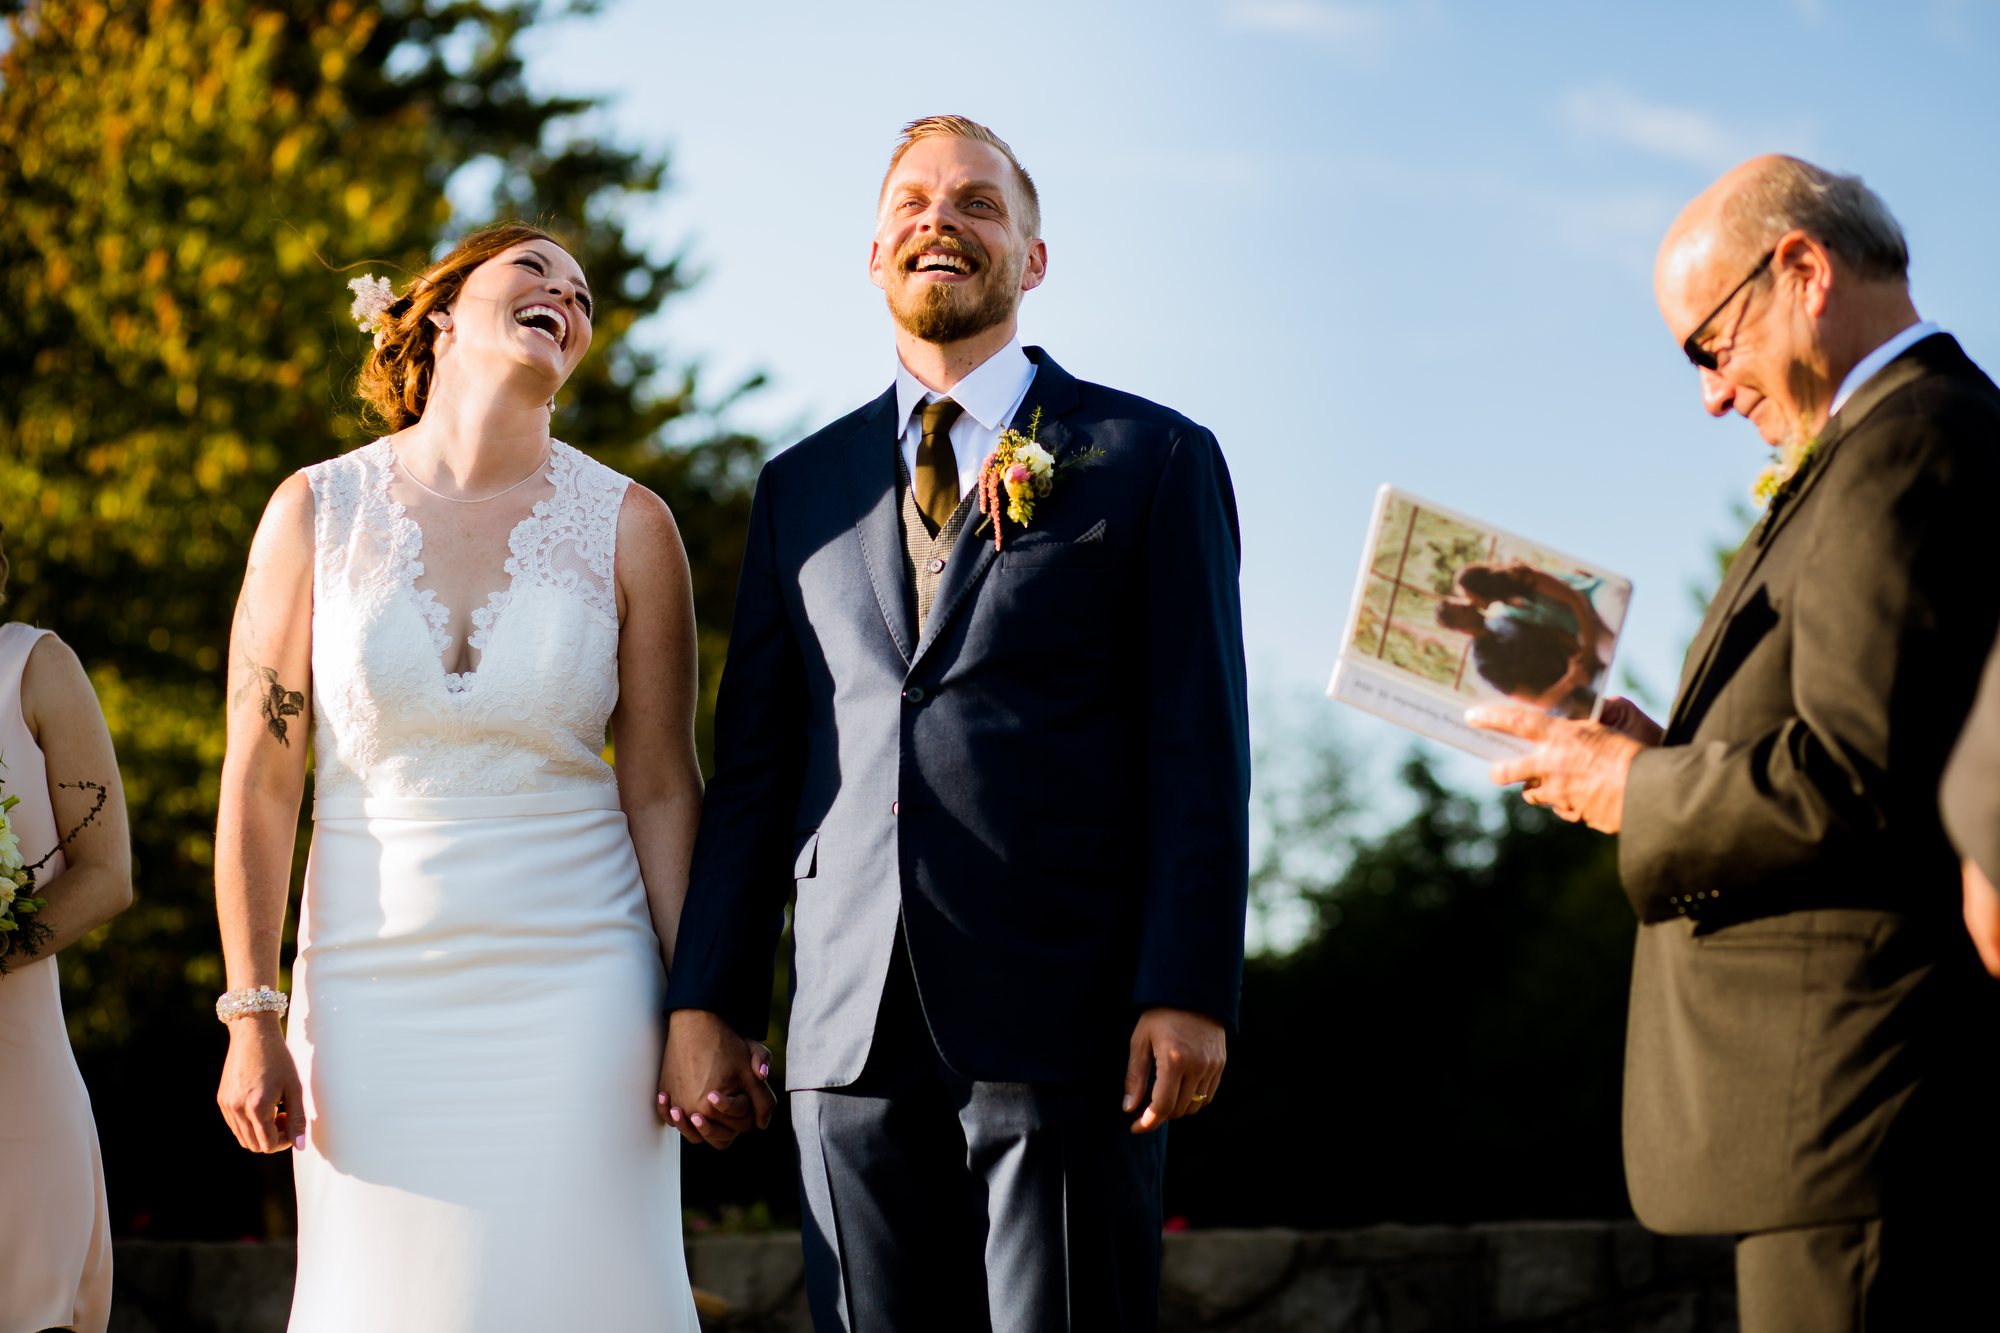 Council Crest and Elder Hall Wedding in Portland, Oregon by Stark Photography.